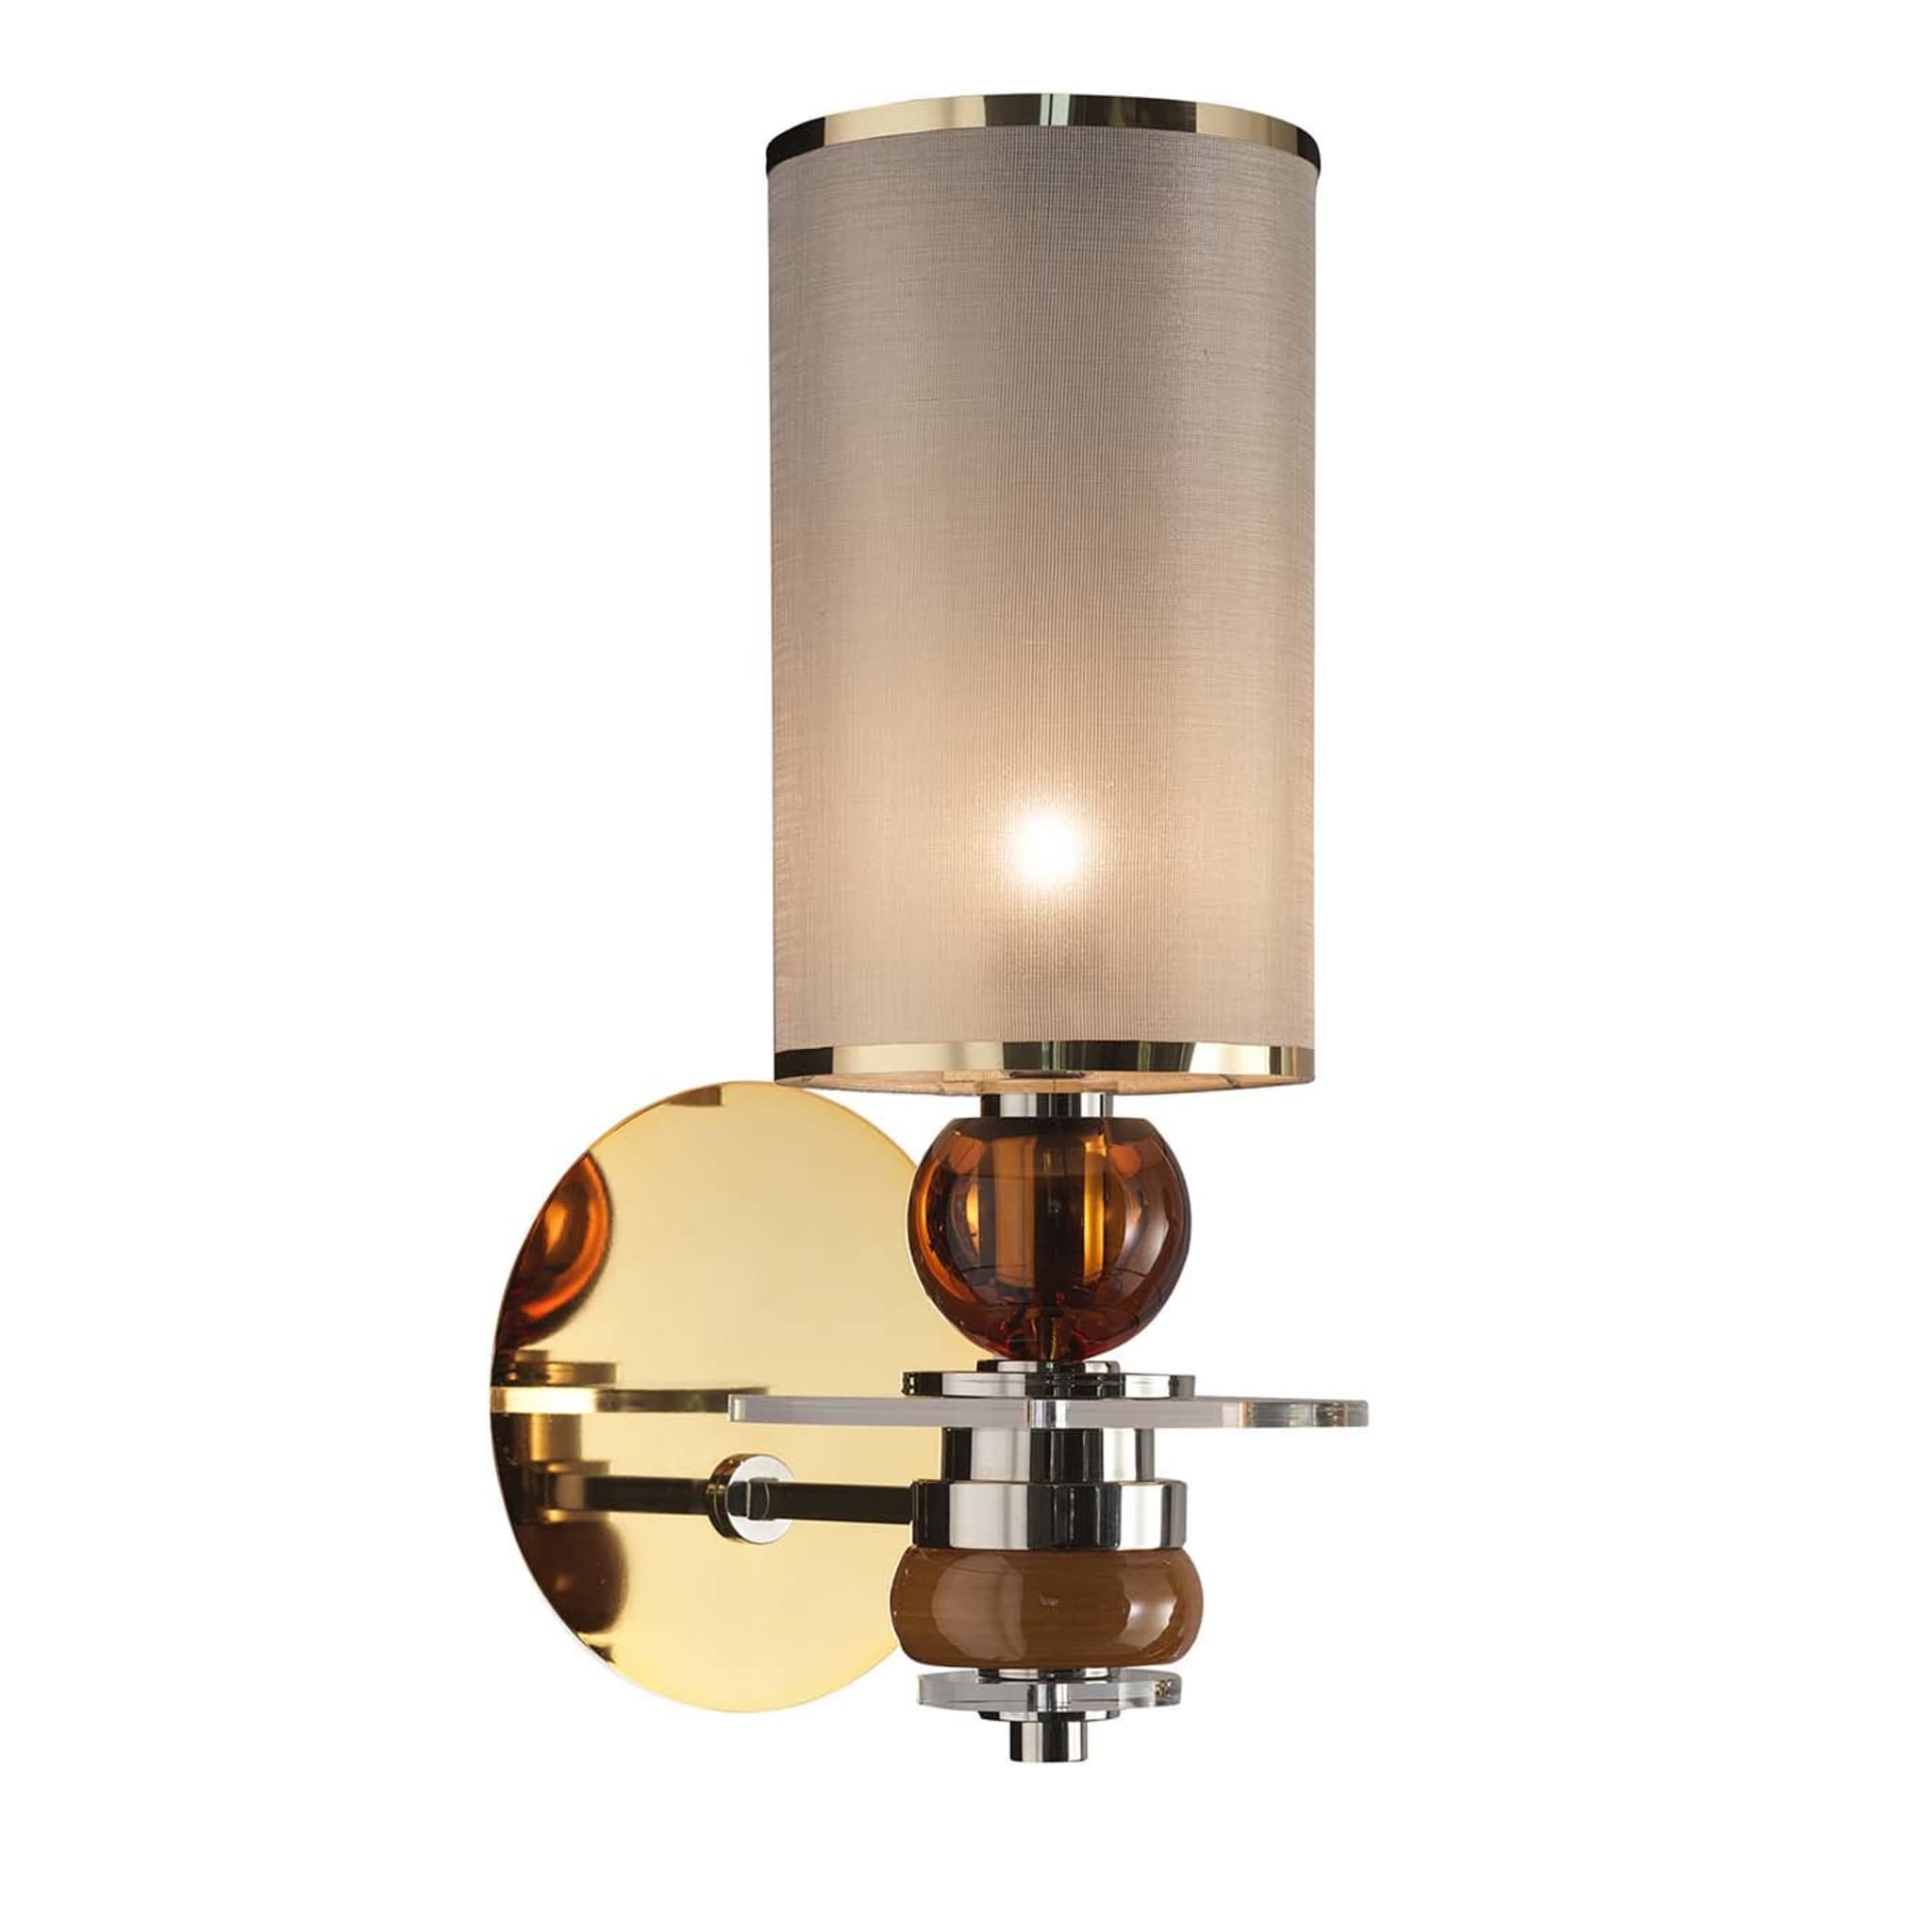 Z624 Brass and Nickel Wall Light - Main view